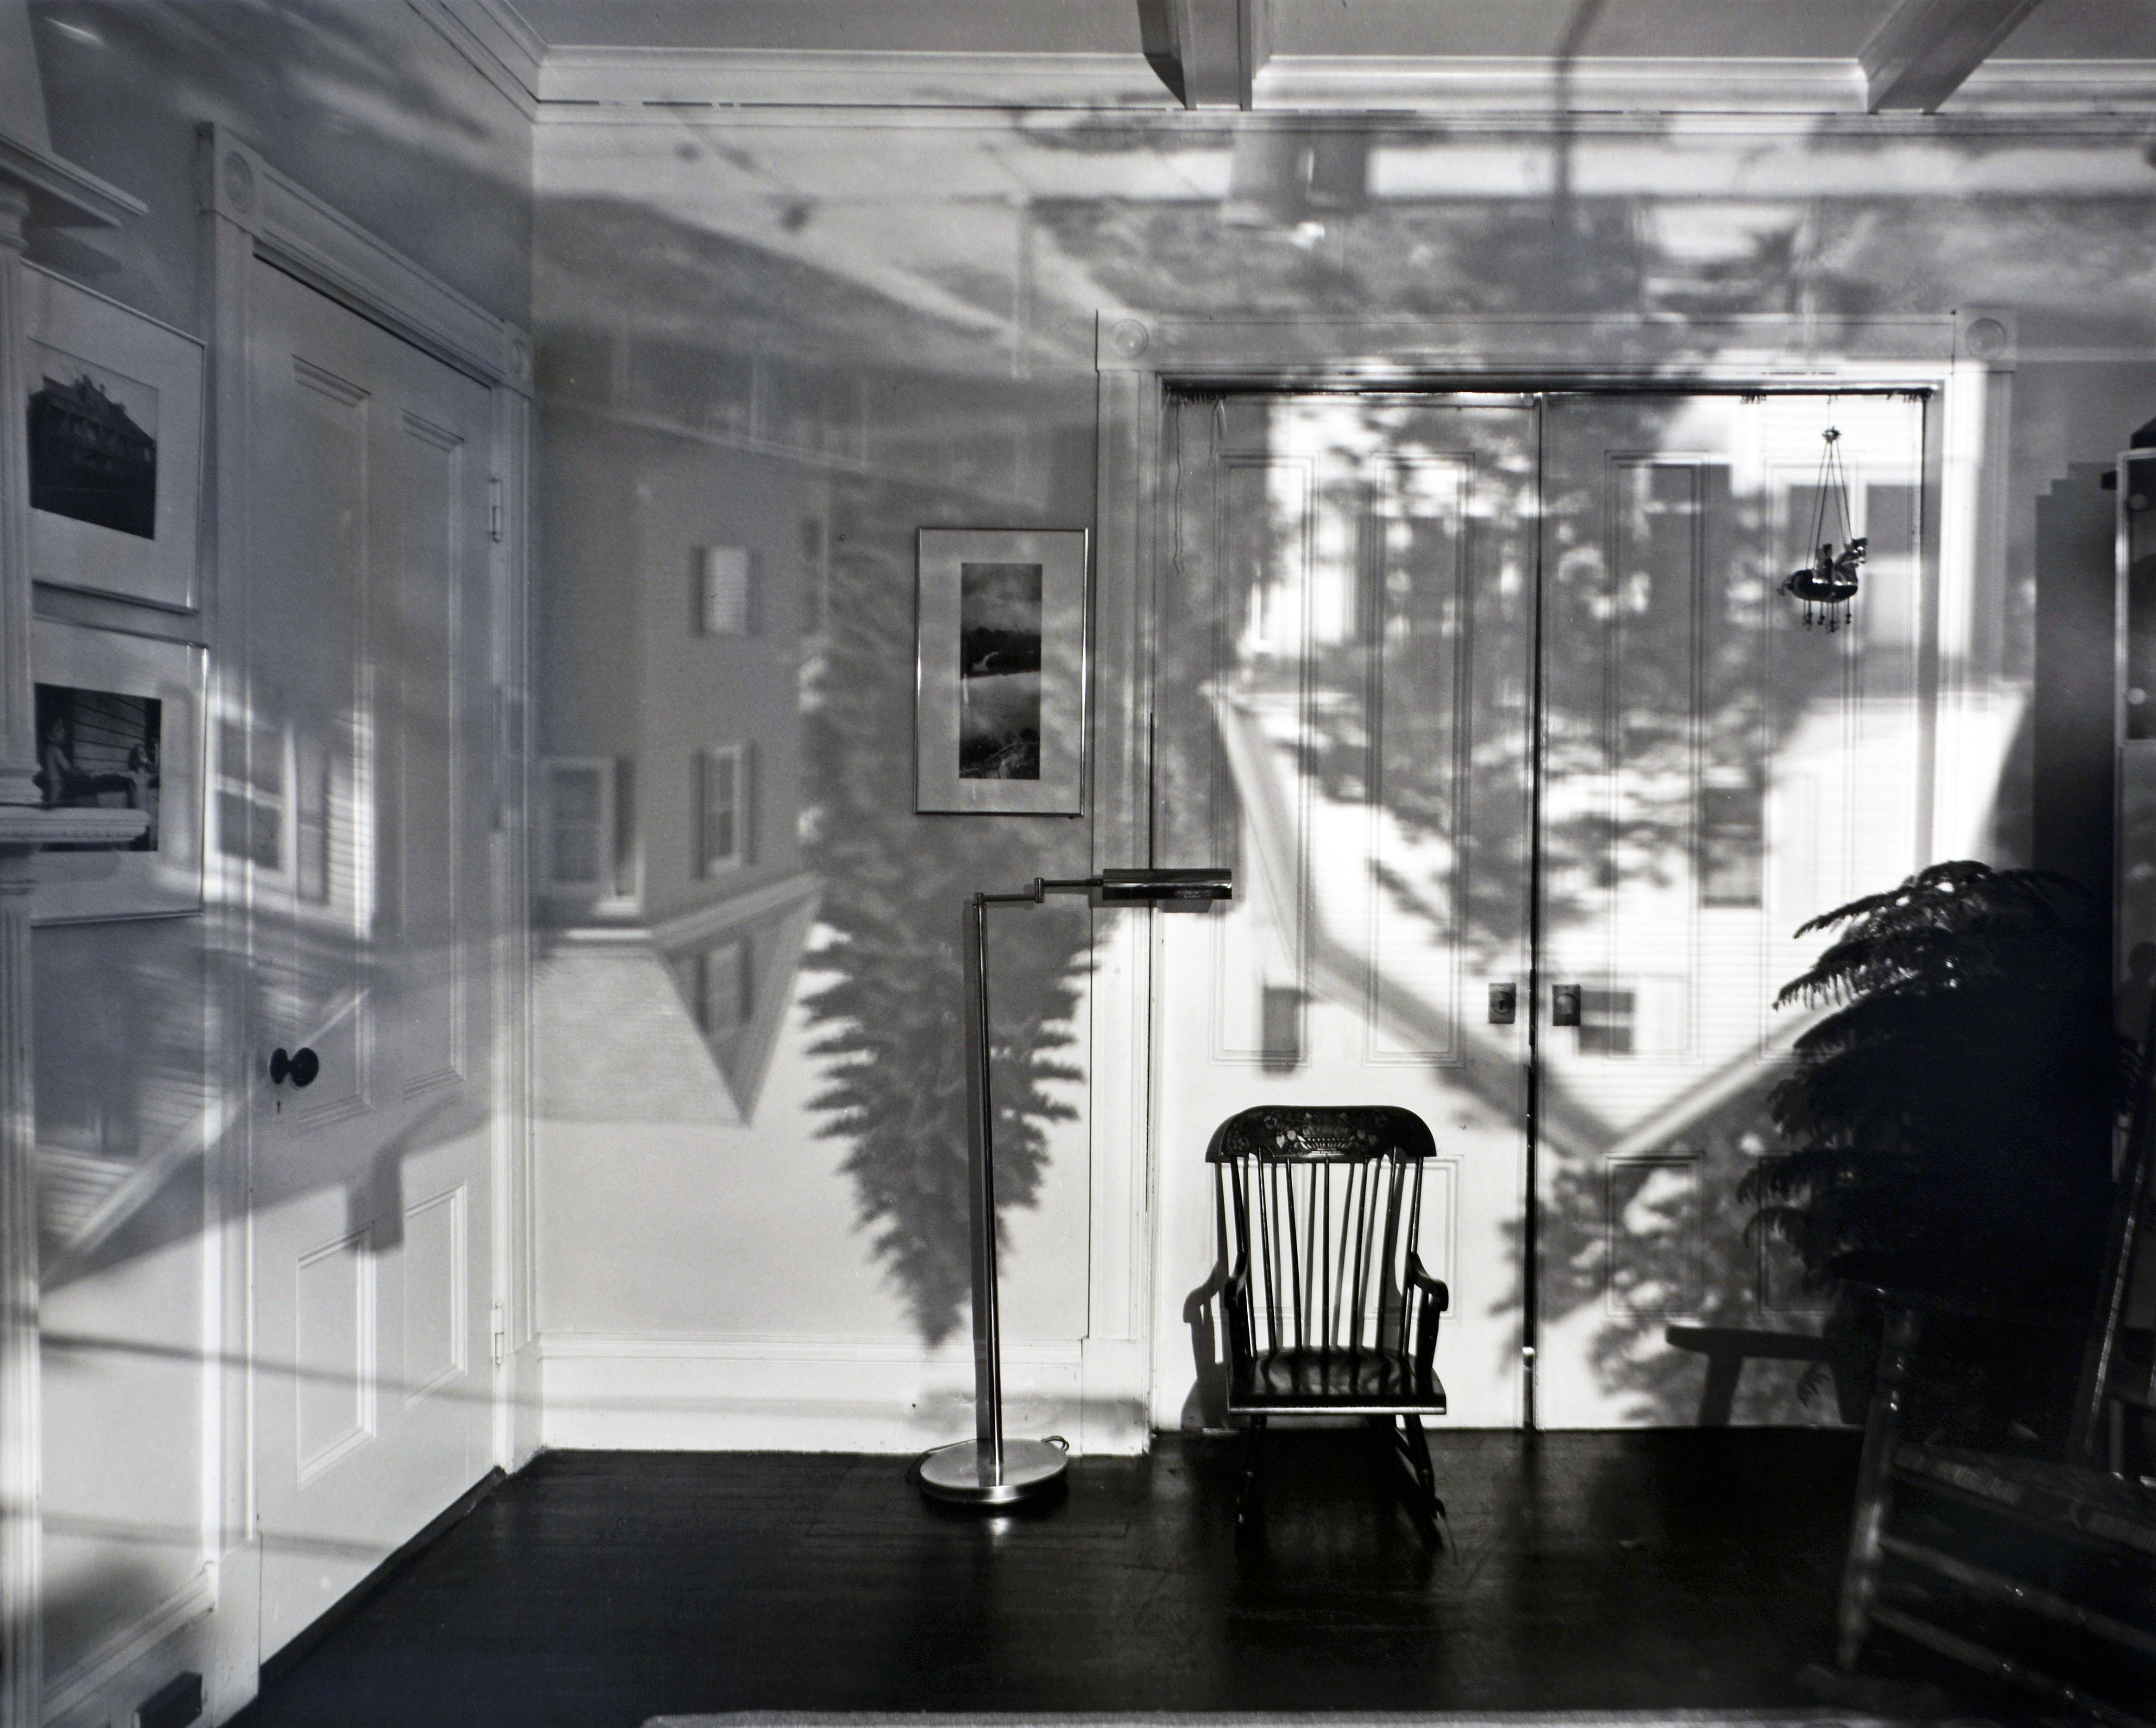 Paper Abelardo Morell, 'Houses Across the Street from Our Living Room' Camera Obscura